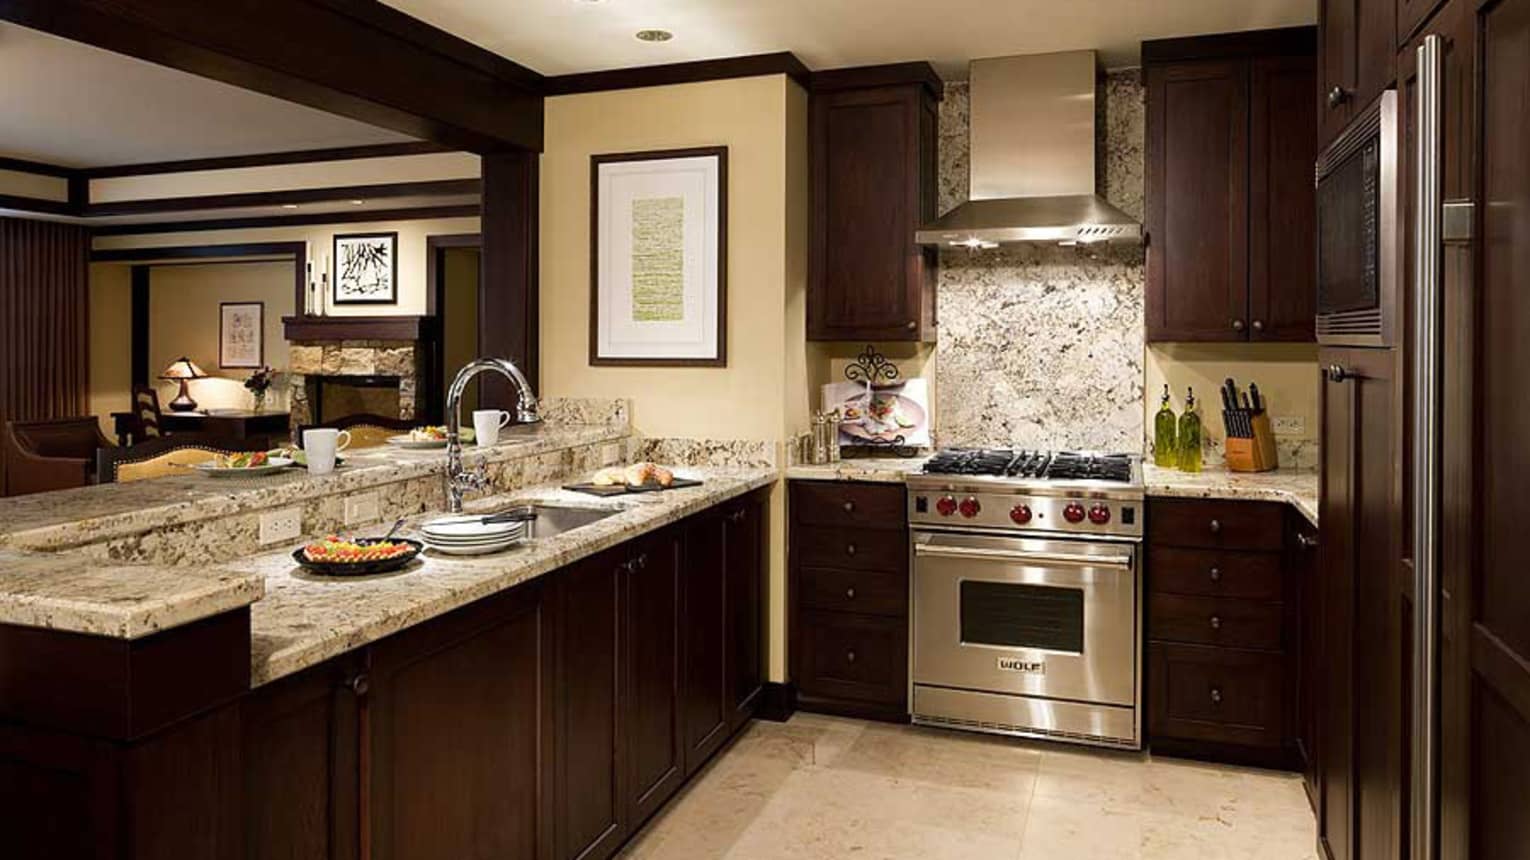 Kitchen with dark wood cupboards, marble counters, stainless steel stove